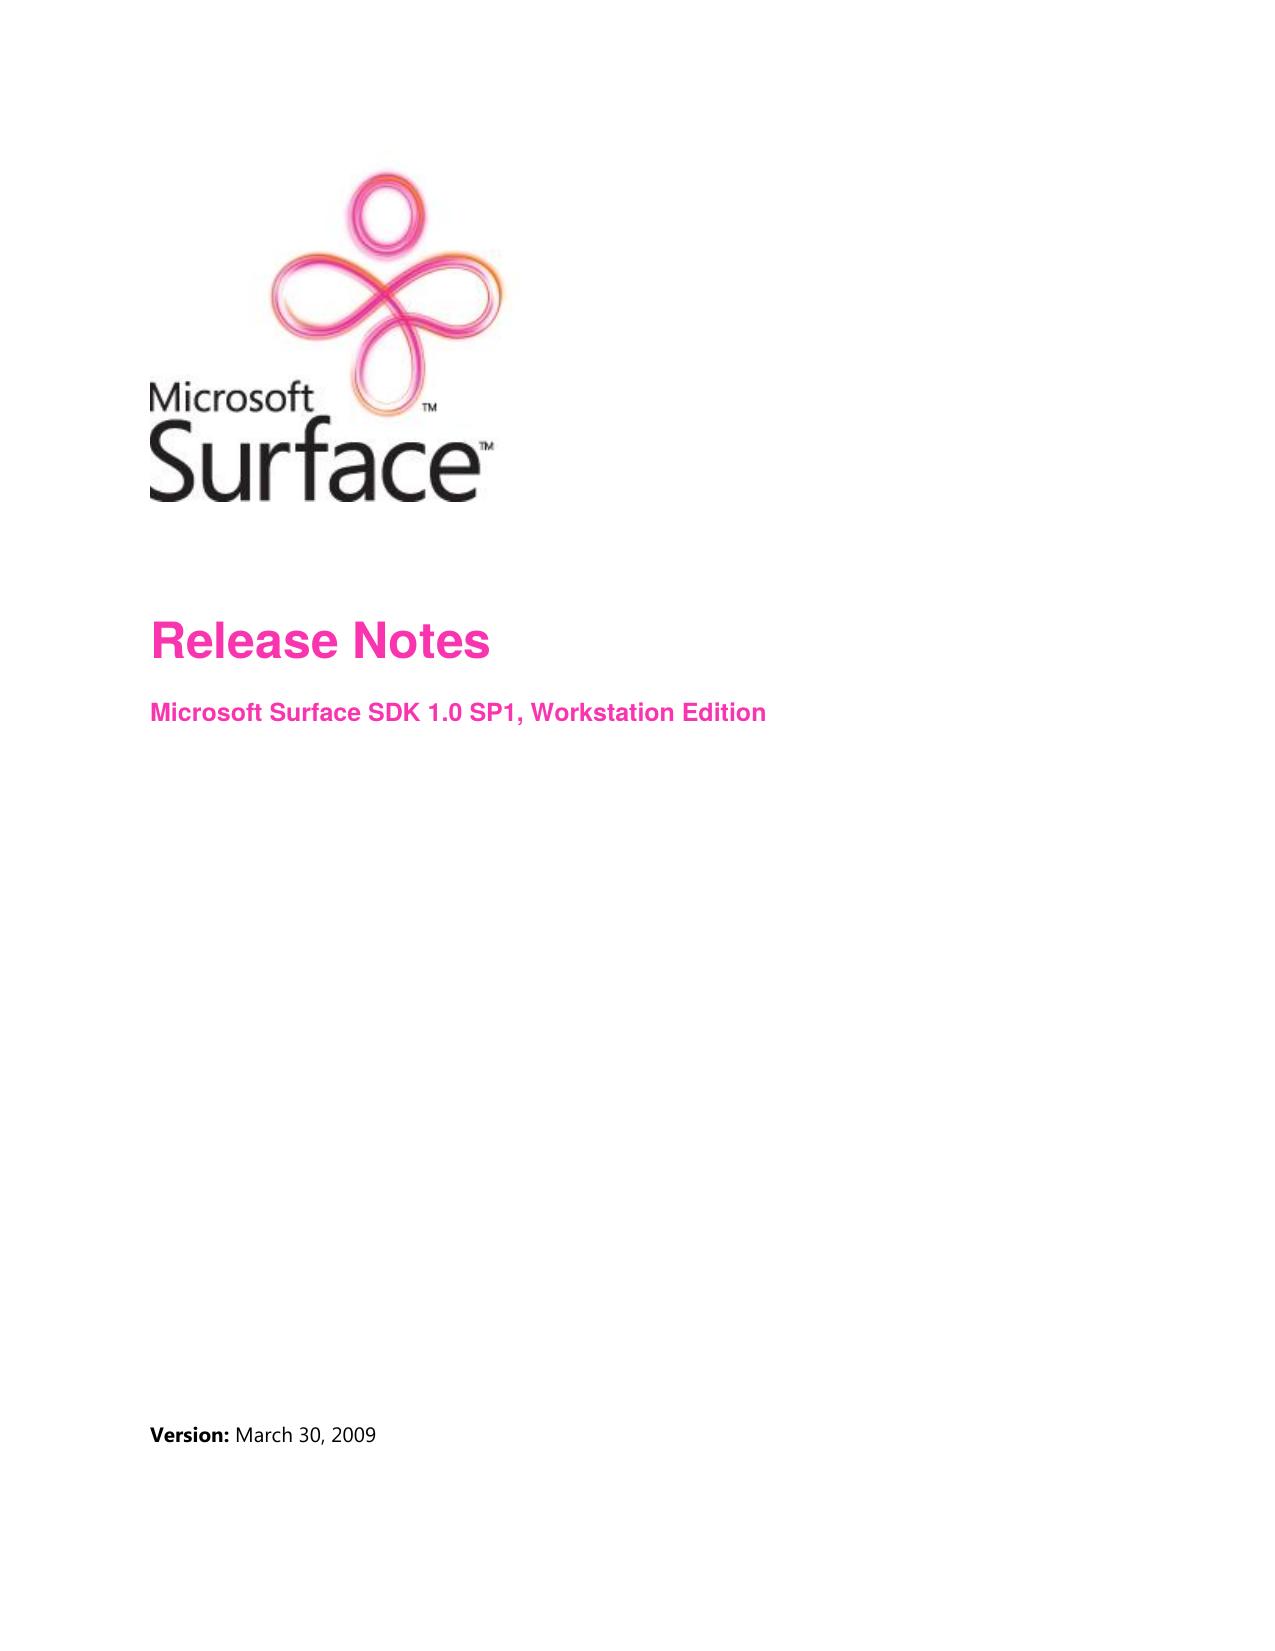 en surface release notes for microsoft surface sdk 1 0 sp1 workstation edition by Unknown